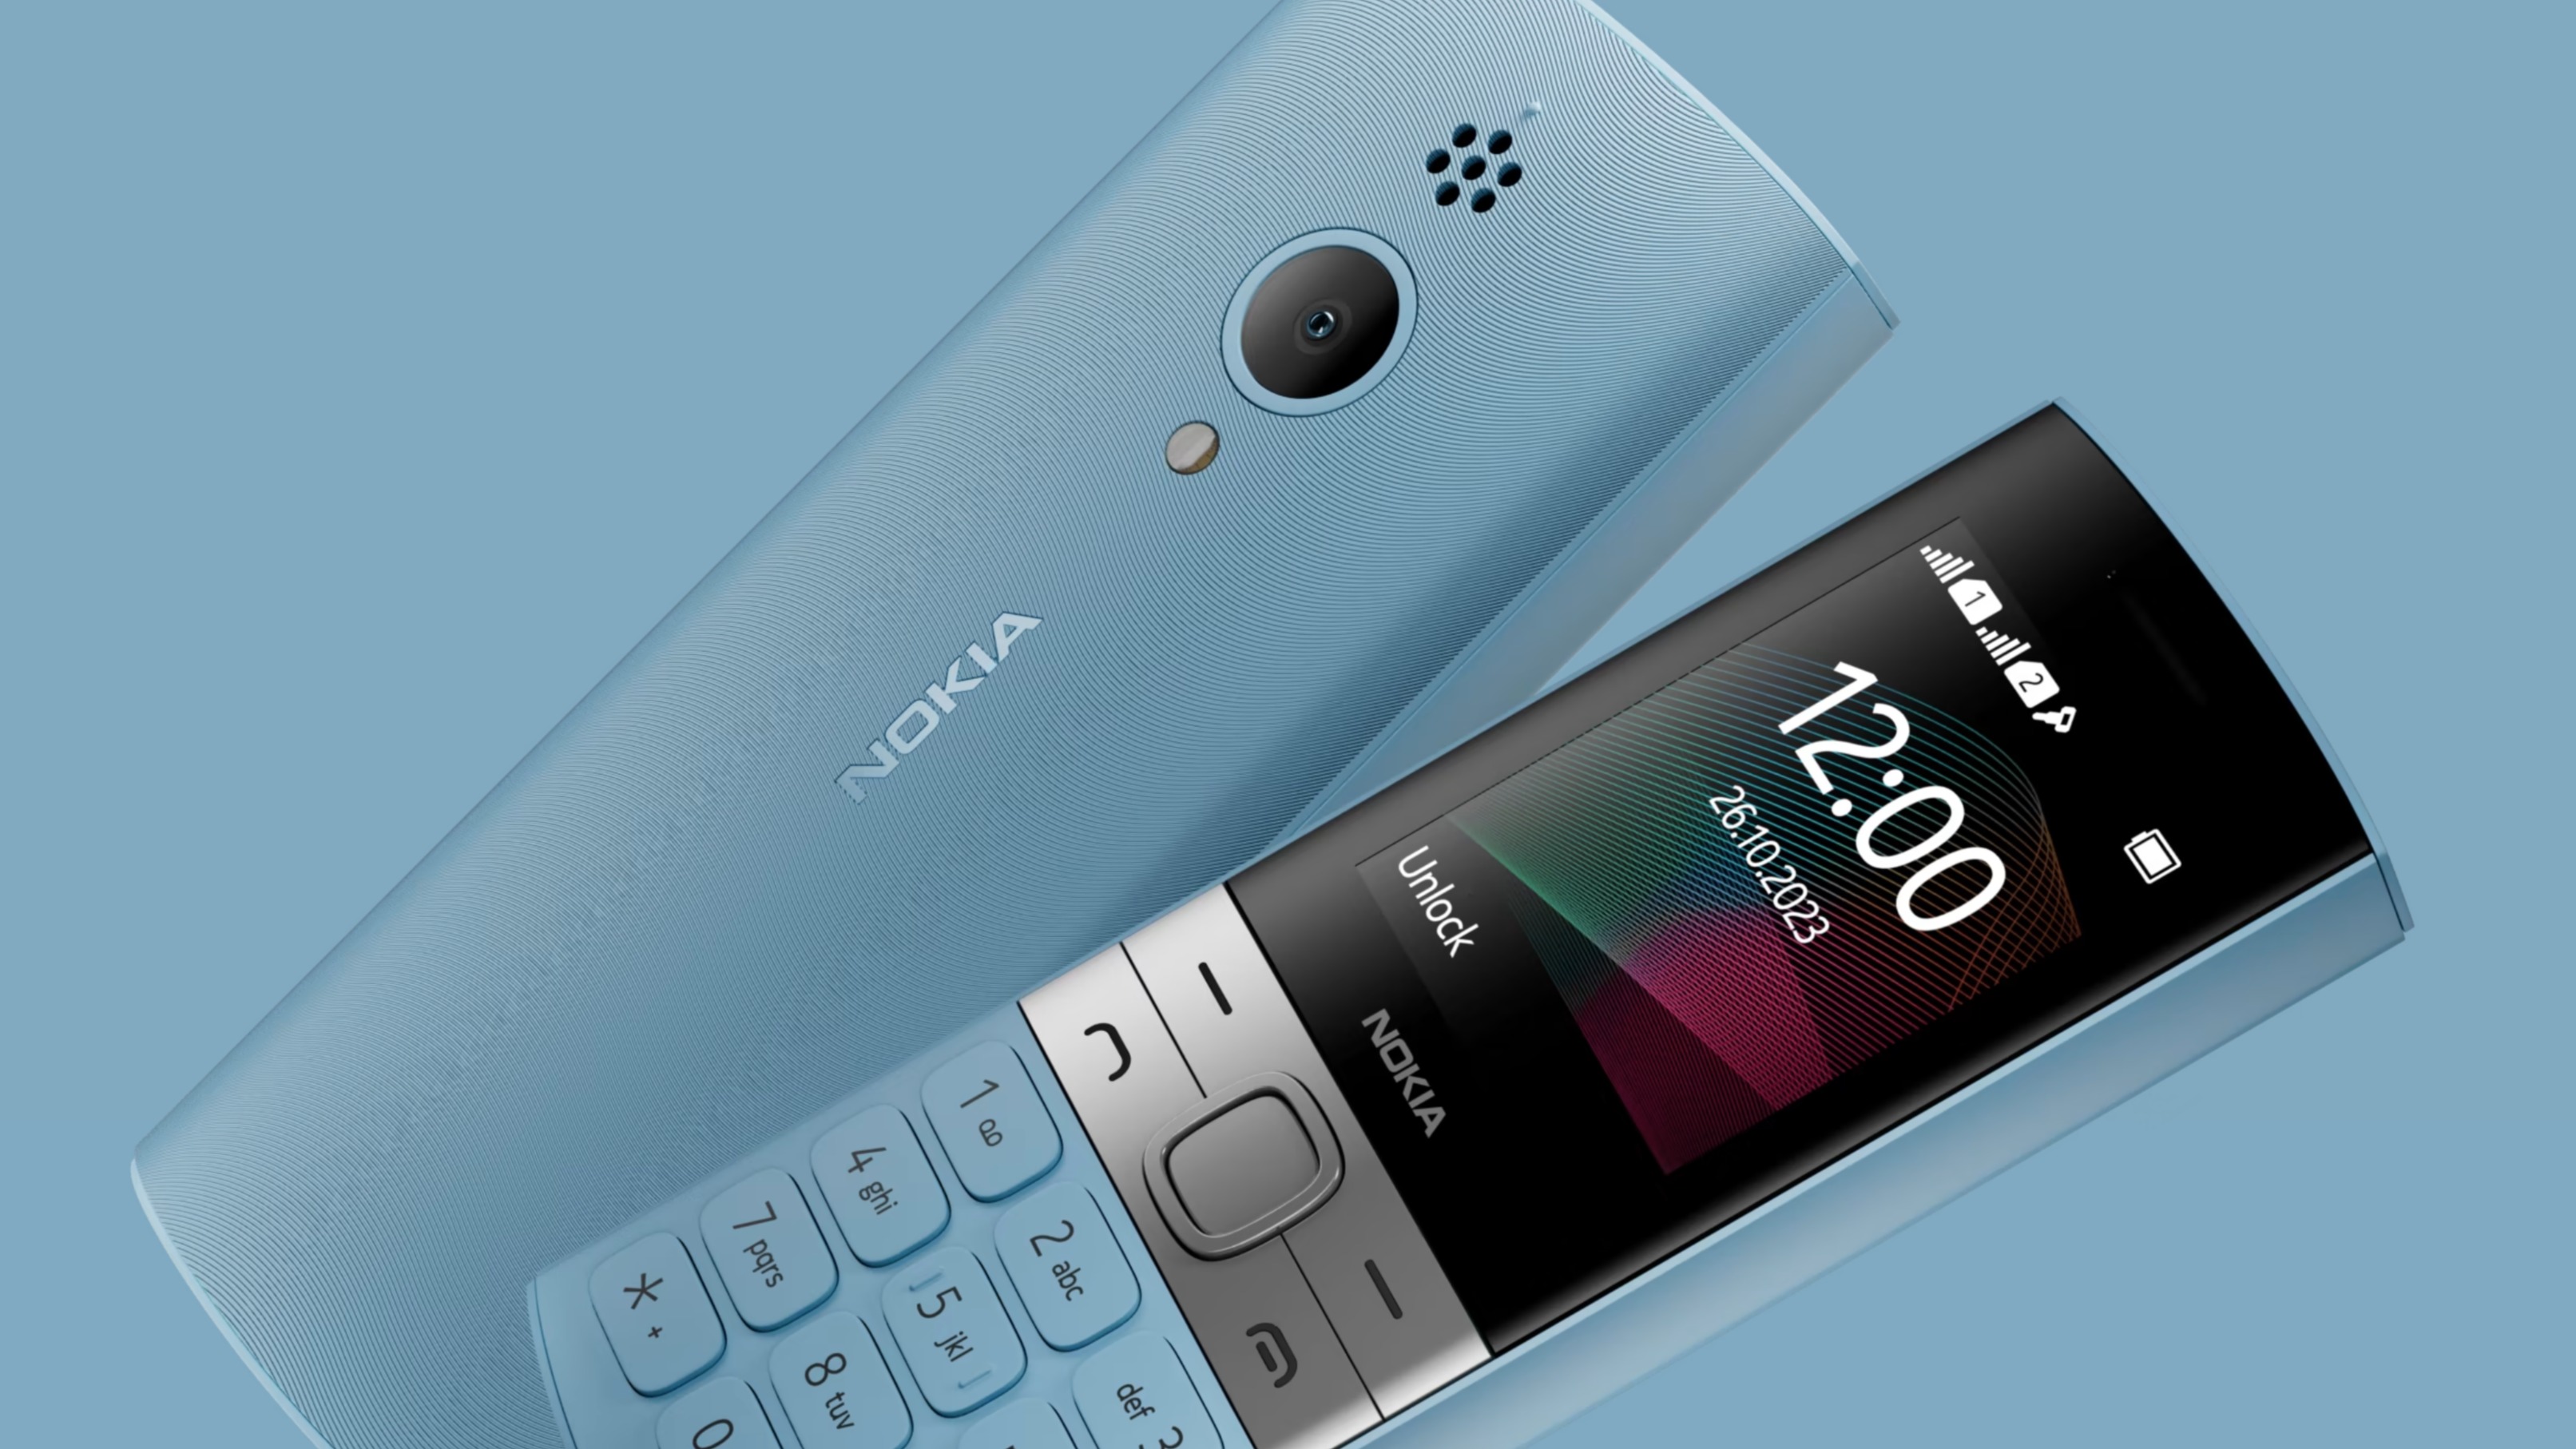 Nokia 150 in blue on a blue background